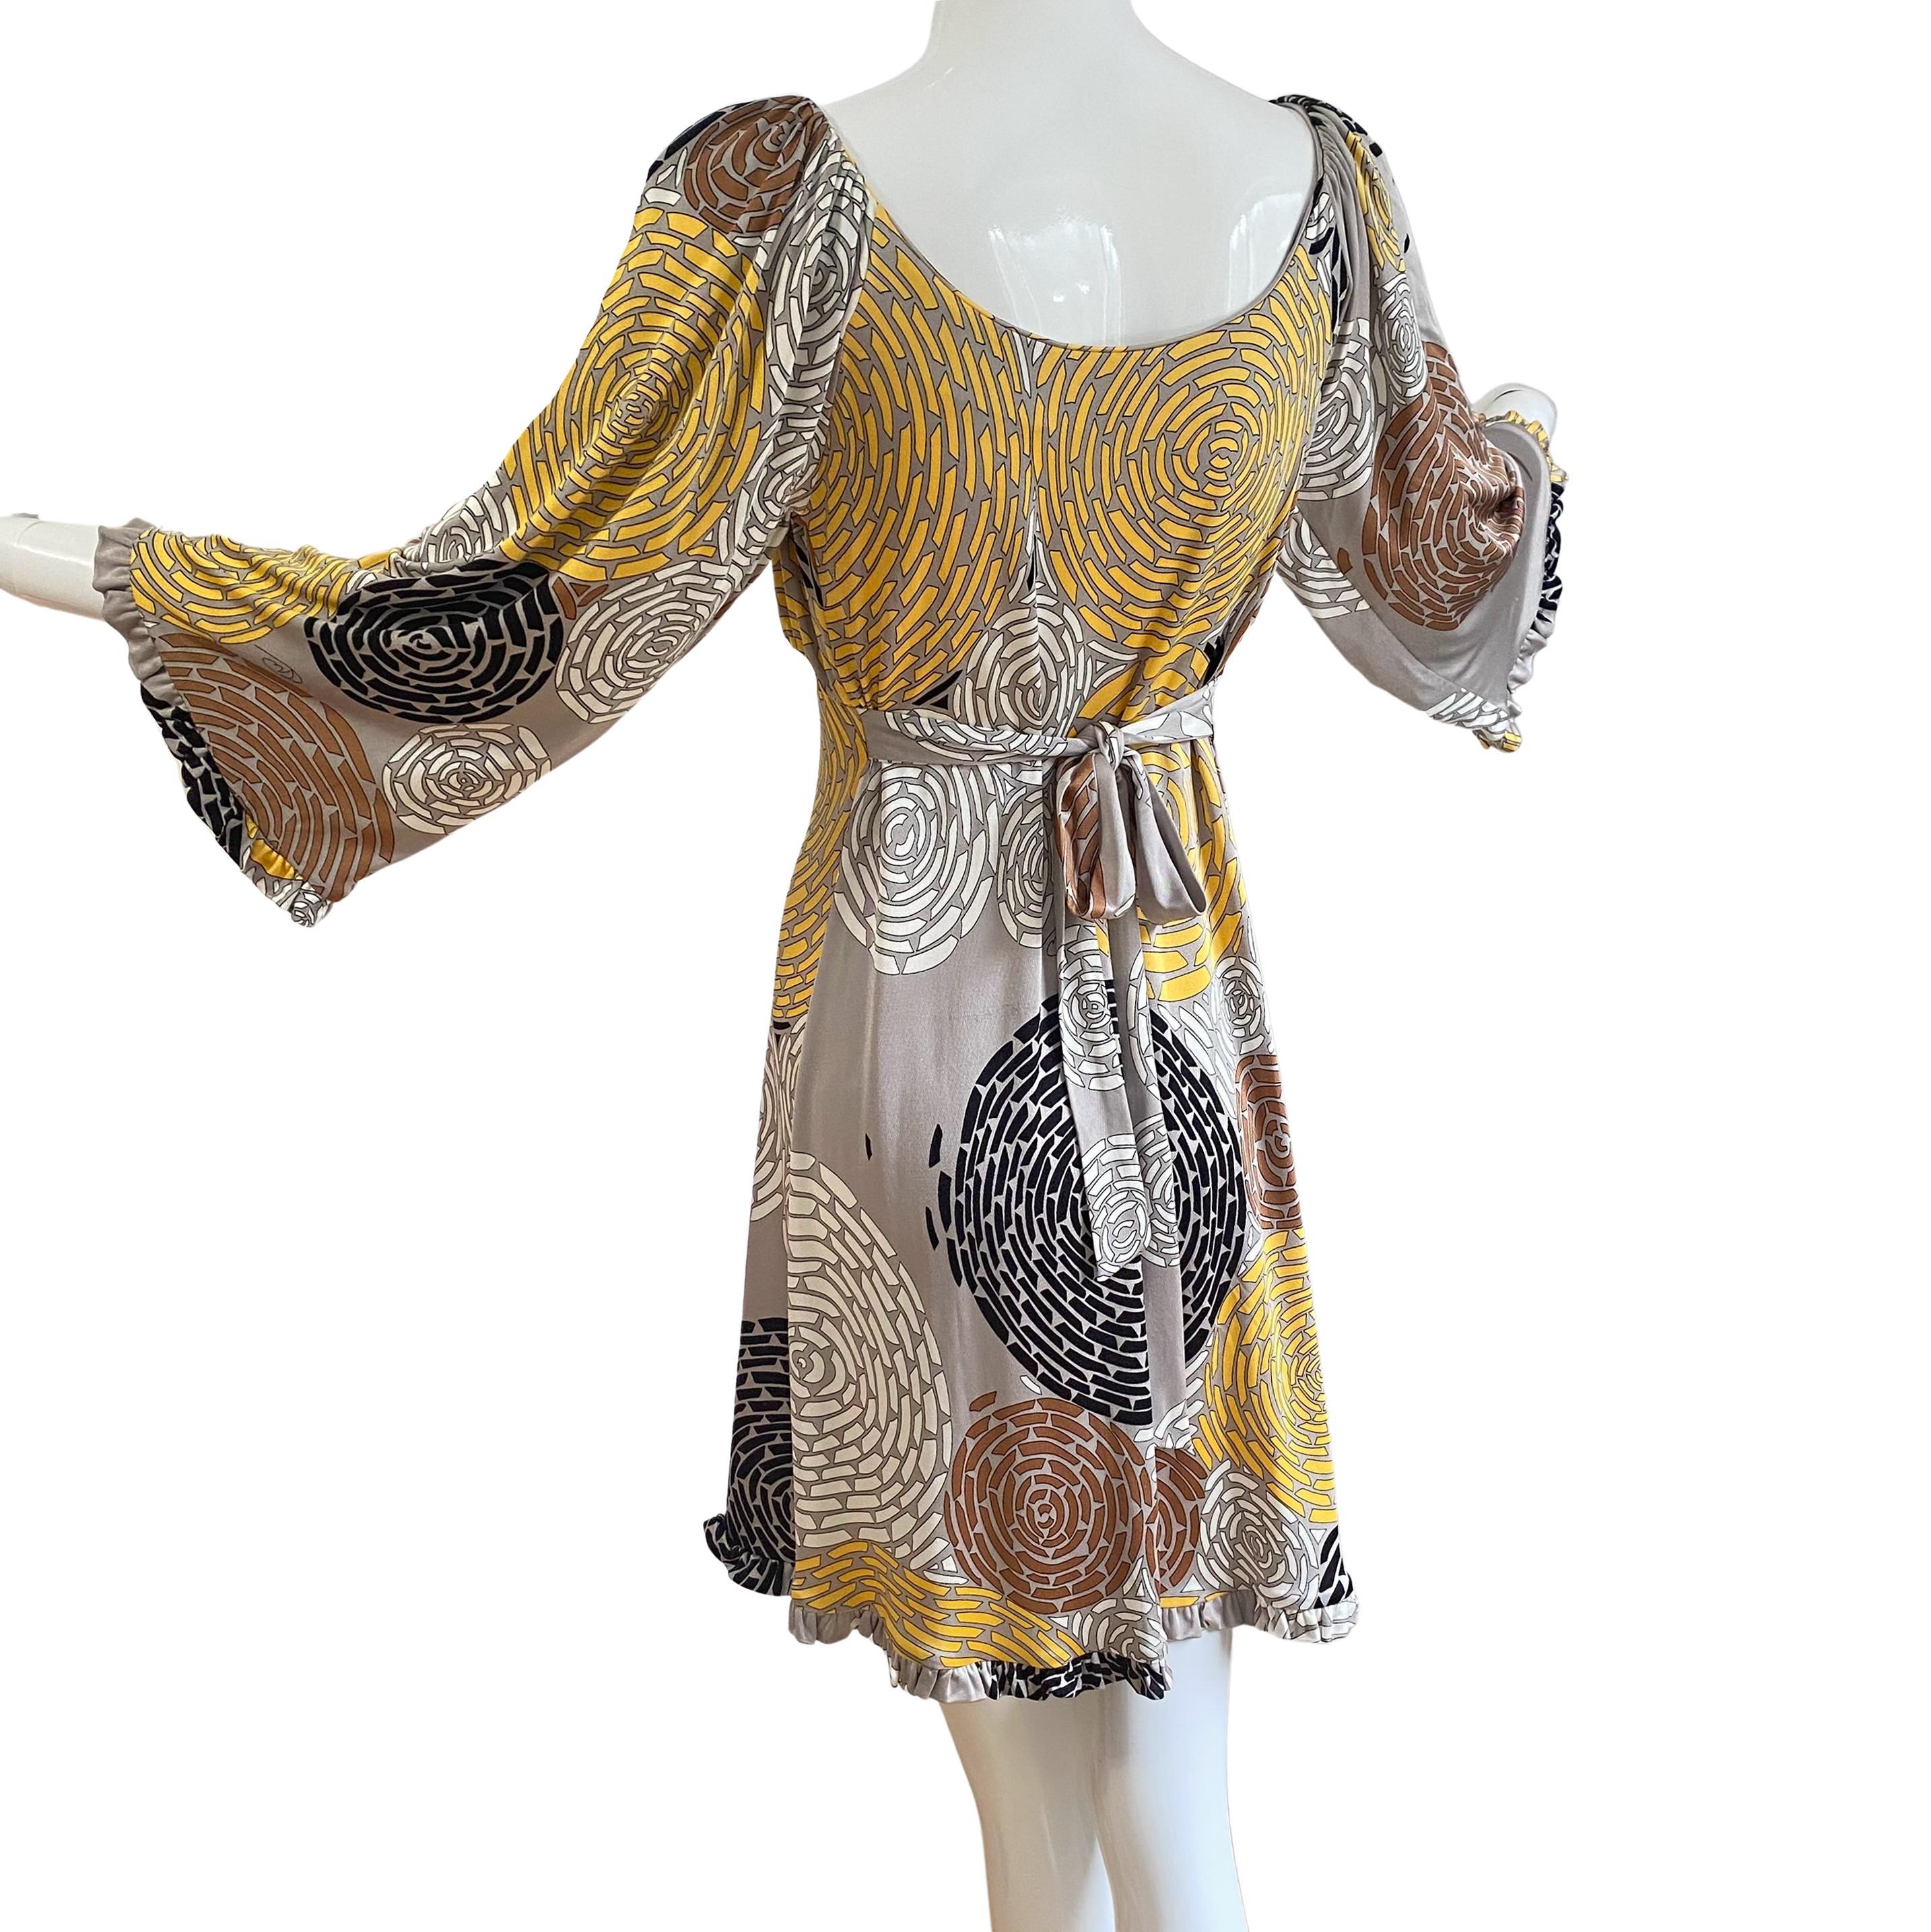  Champagne color Boho Abstract Floral Mini Silk Dress - NWT FLORA KUNG  For Sale 1